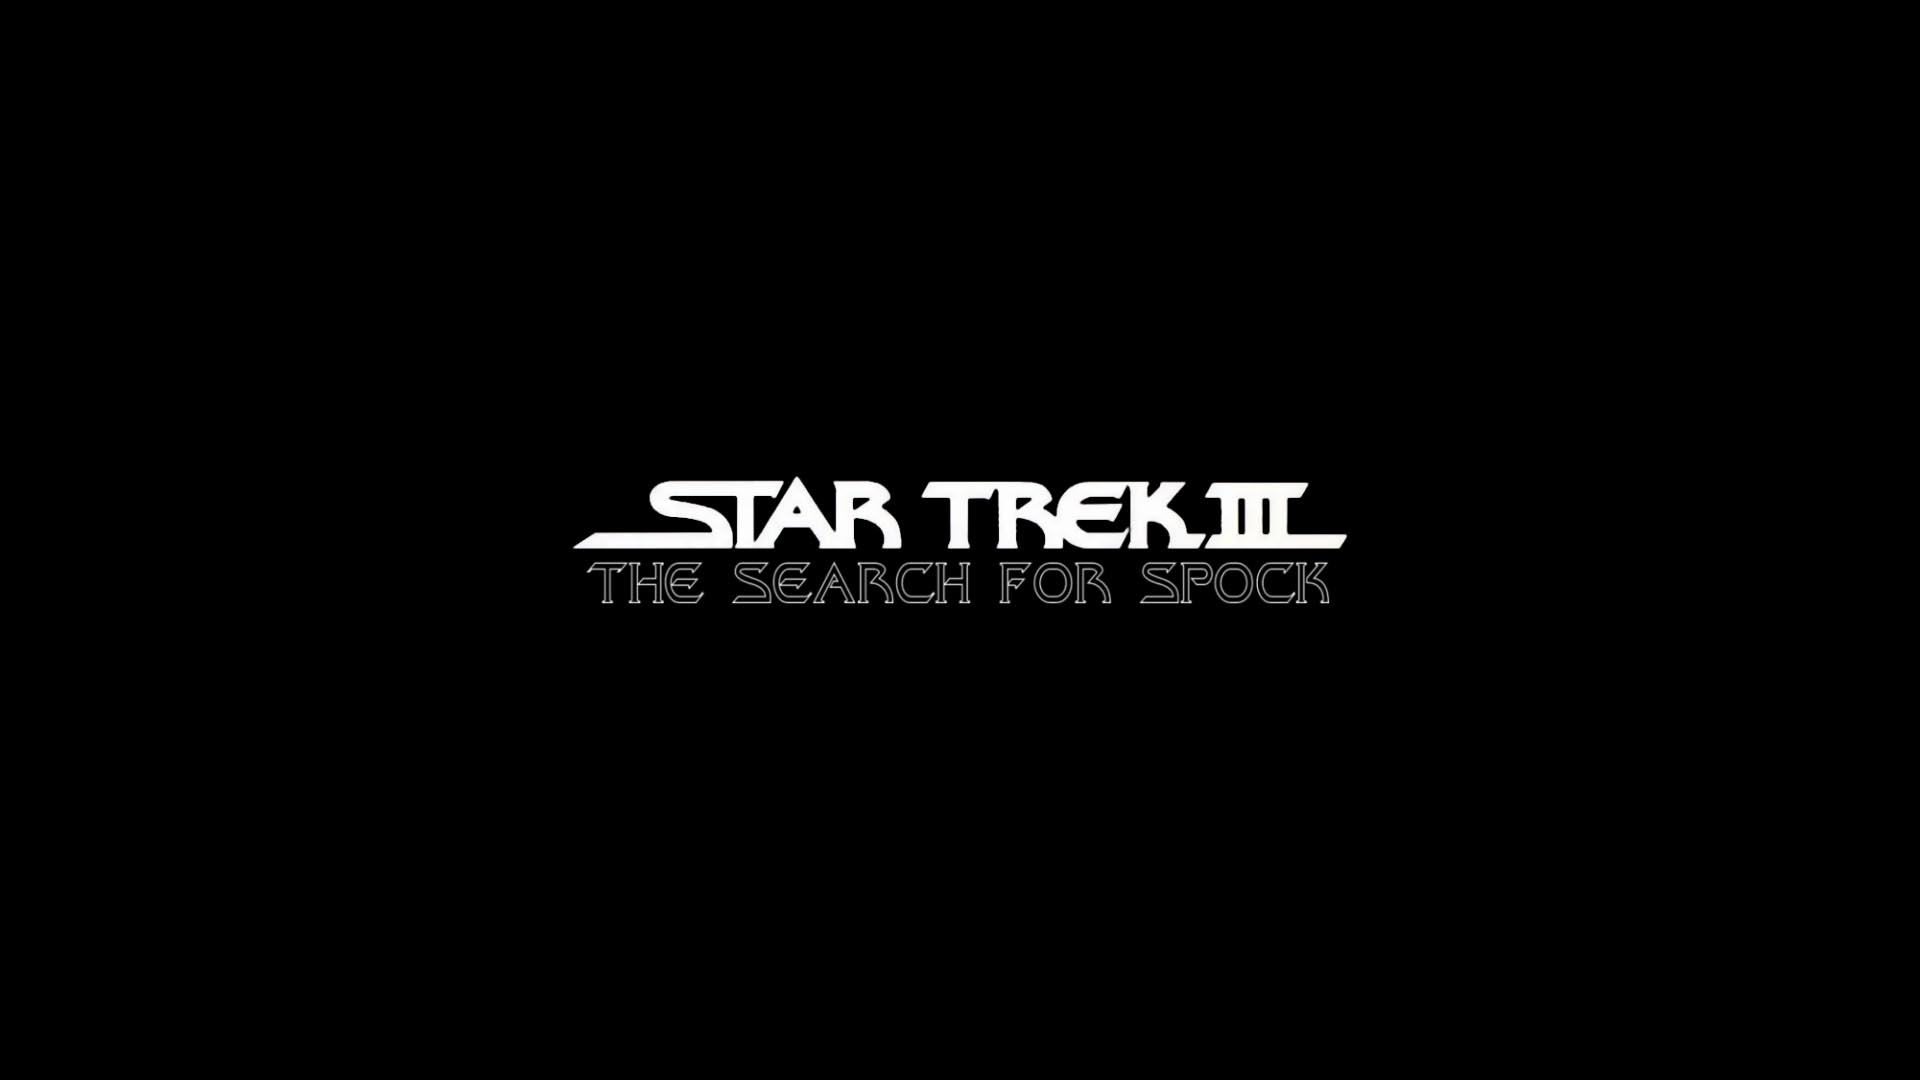 Movie Star Trek III: The Search for Spock HD Wallpaper | Background Image